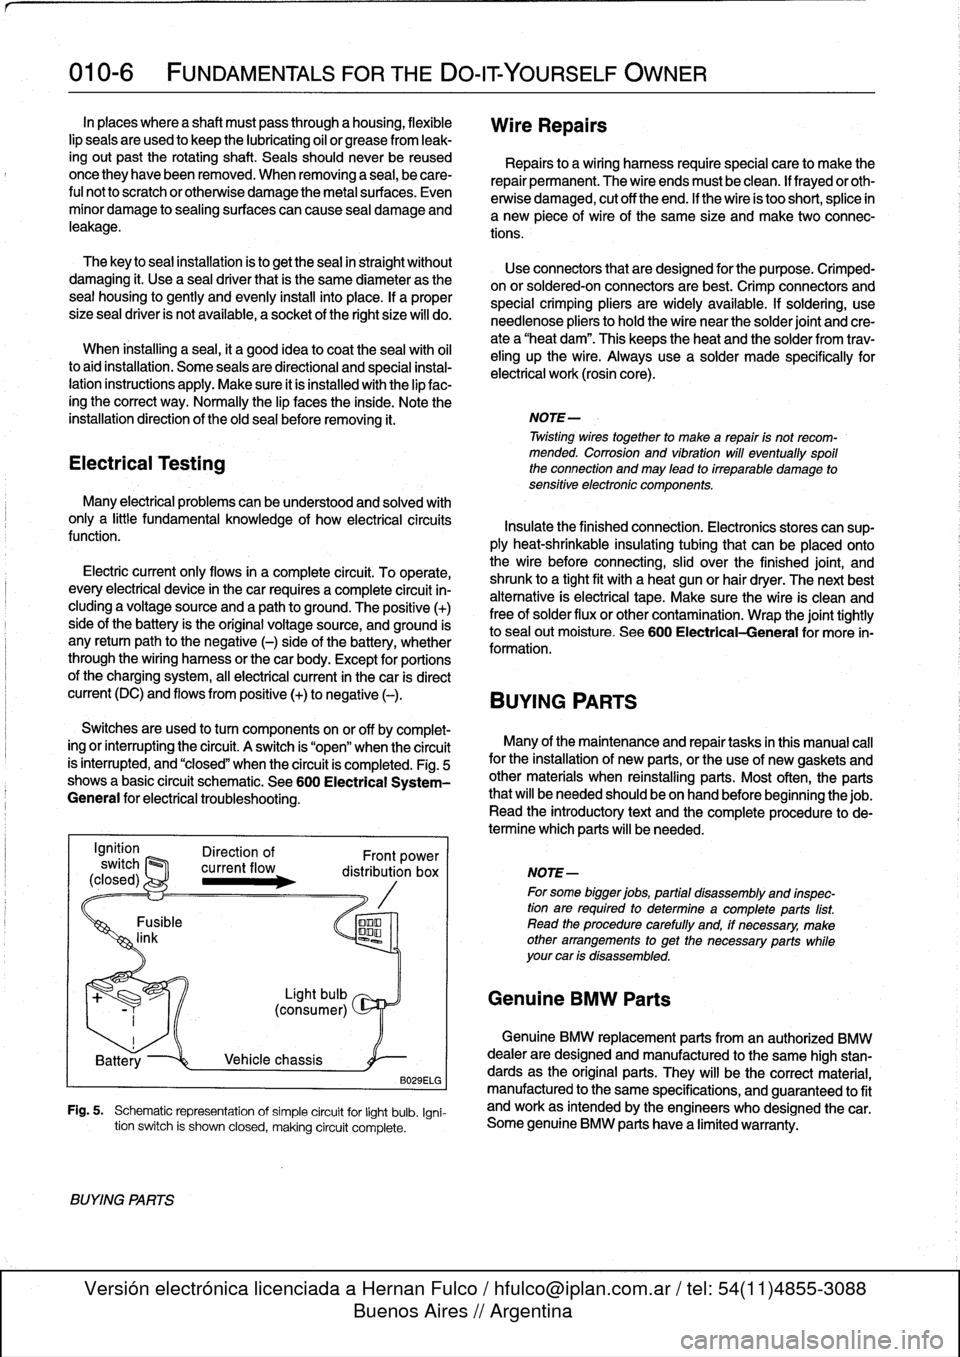 BMW 318i 1992 E36 Workshop Manual 
010-
6

	

FUNDAMENTALS
FOR
THE
DO-ITYOURSELF
OWNER

In
places
where
a
shaft
mustpass
through
a
housing,
flexible
lip
seals
areused
to
keep
the
lubricating
oil
or
grease
from
leak-

ingout
past
the
r